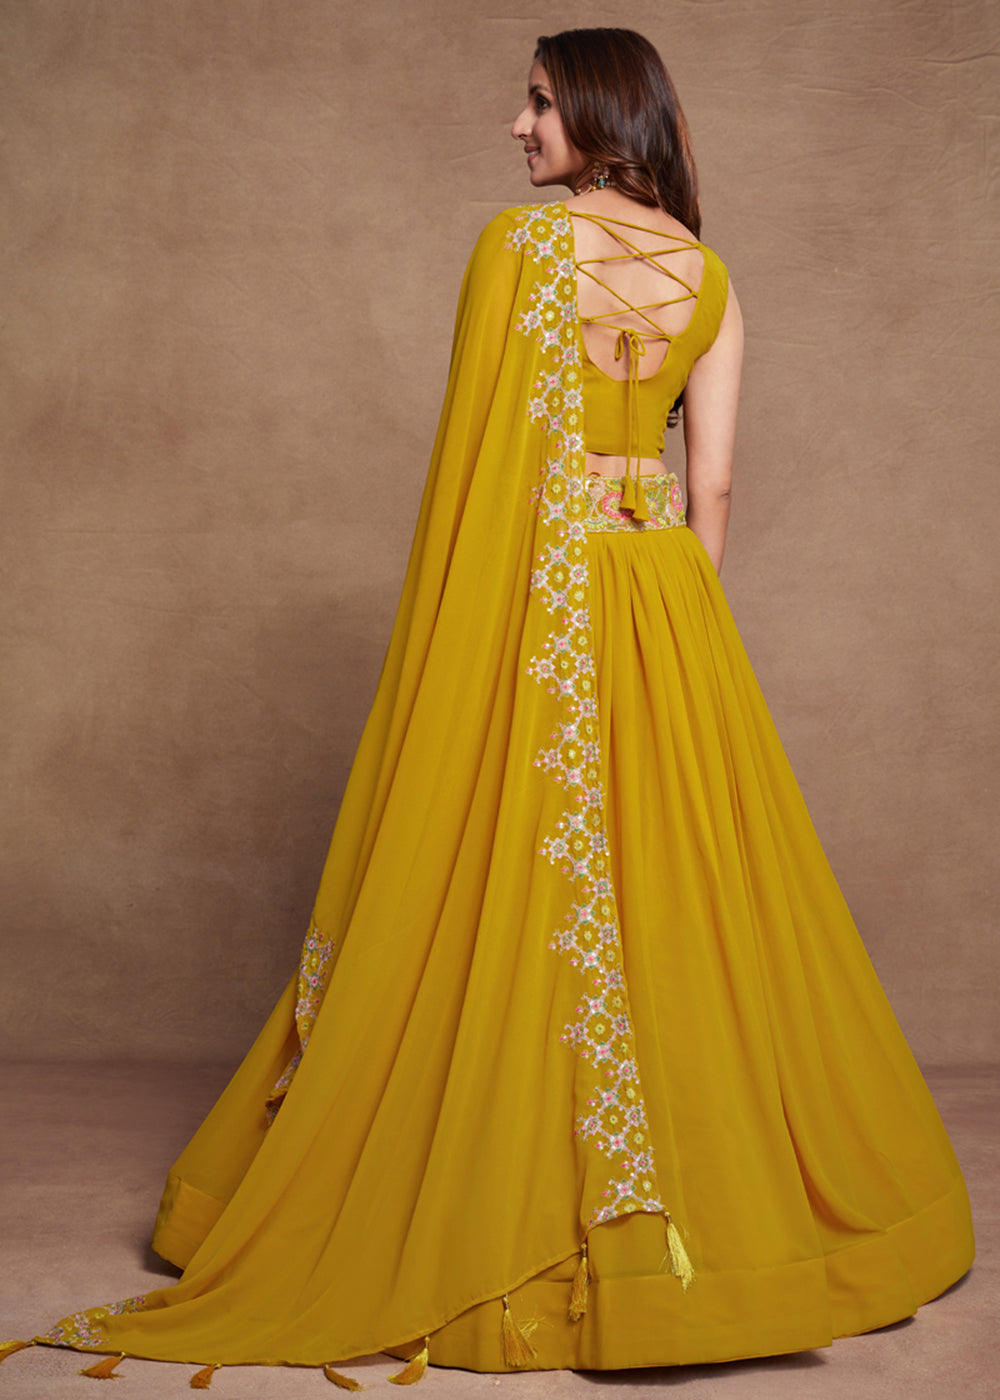 Buy Now Blooming Georgette Yellow Embroidered Festive Lehenga Choli Online in USA, UK, Canada & Worldwide at Empress Clothing.